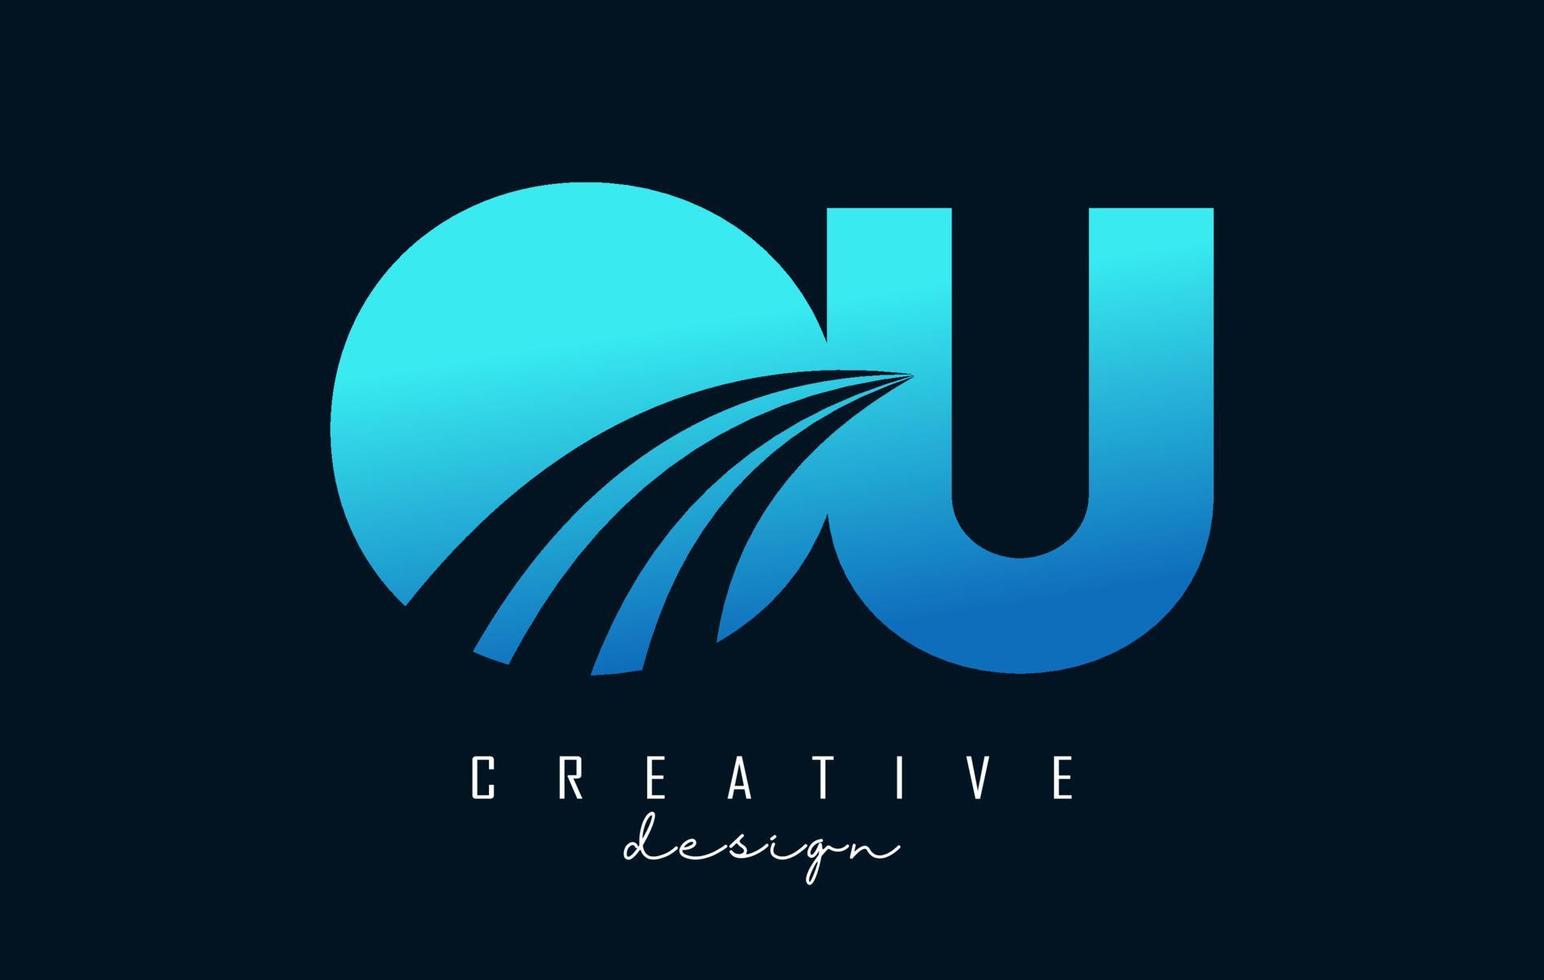 Creative blue letters Ou o u logo with leading lines and road concept design. Letters with geometric design. vector